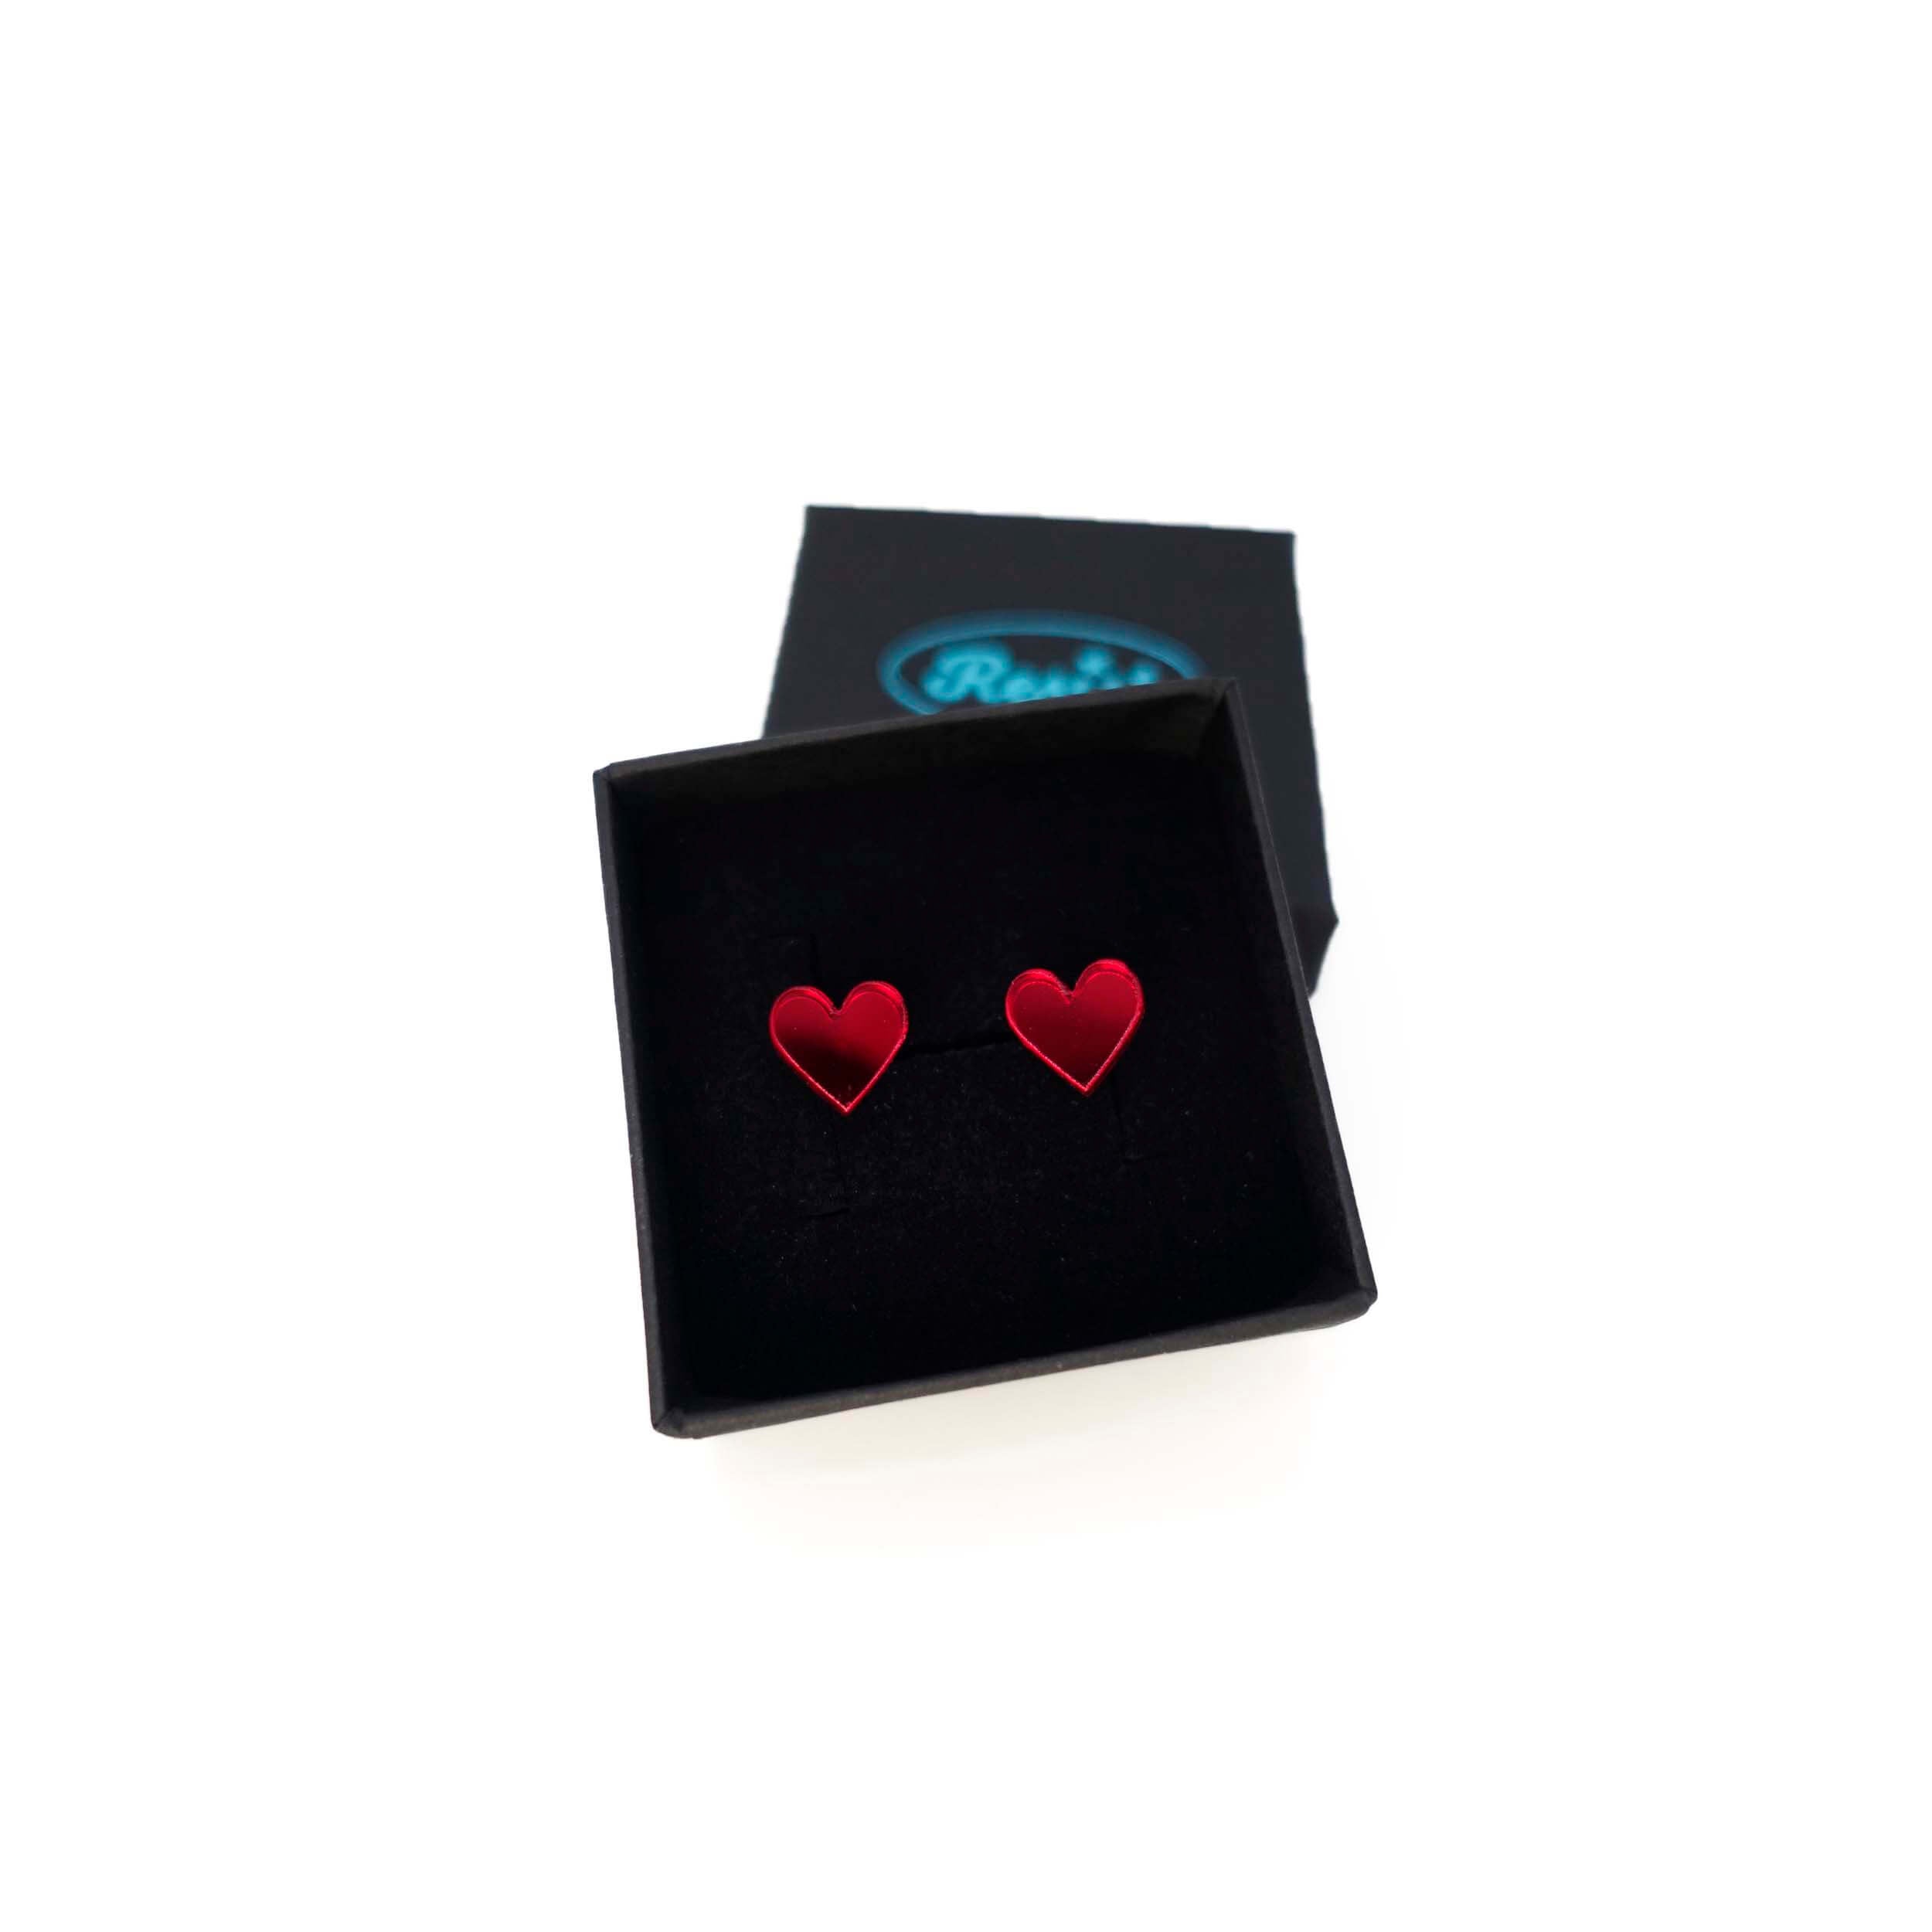 Crimson mirror tiny heart stud earrings shown in a Wear and Resist gift box. 